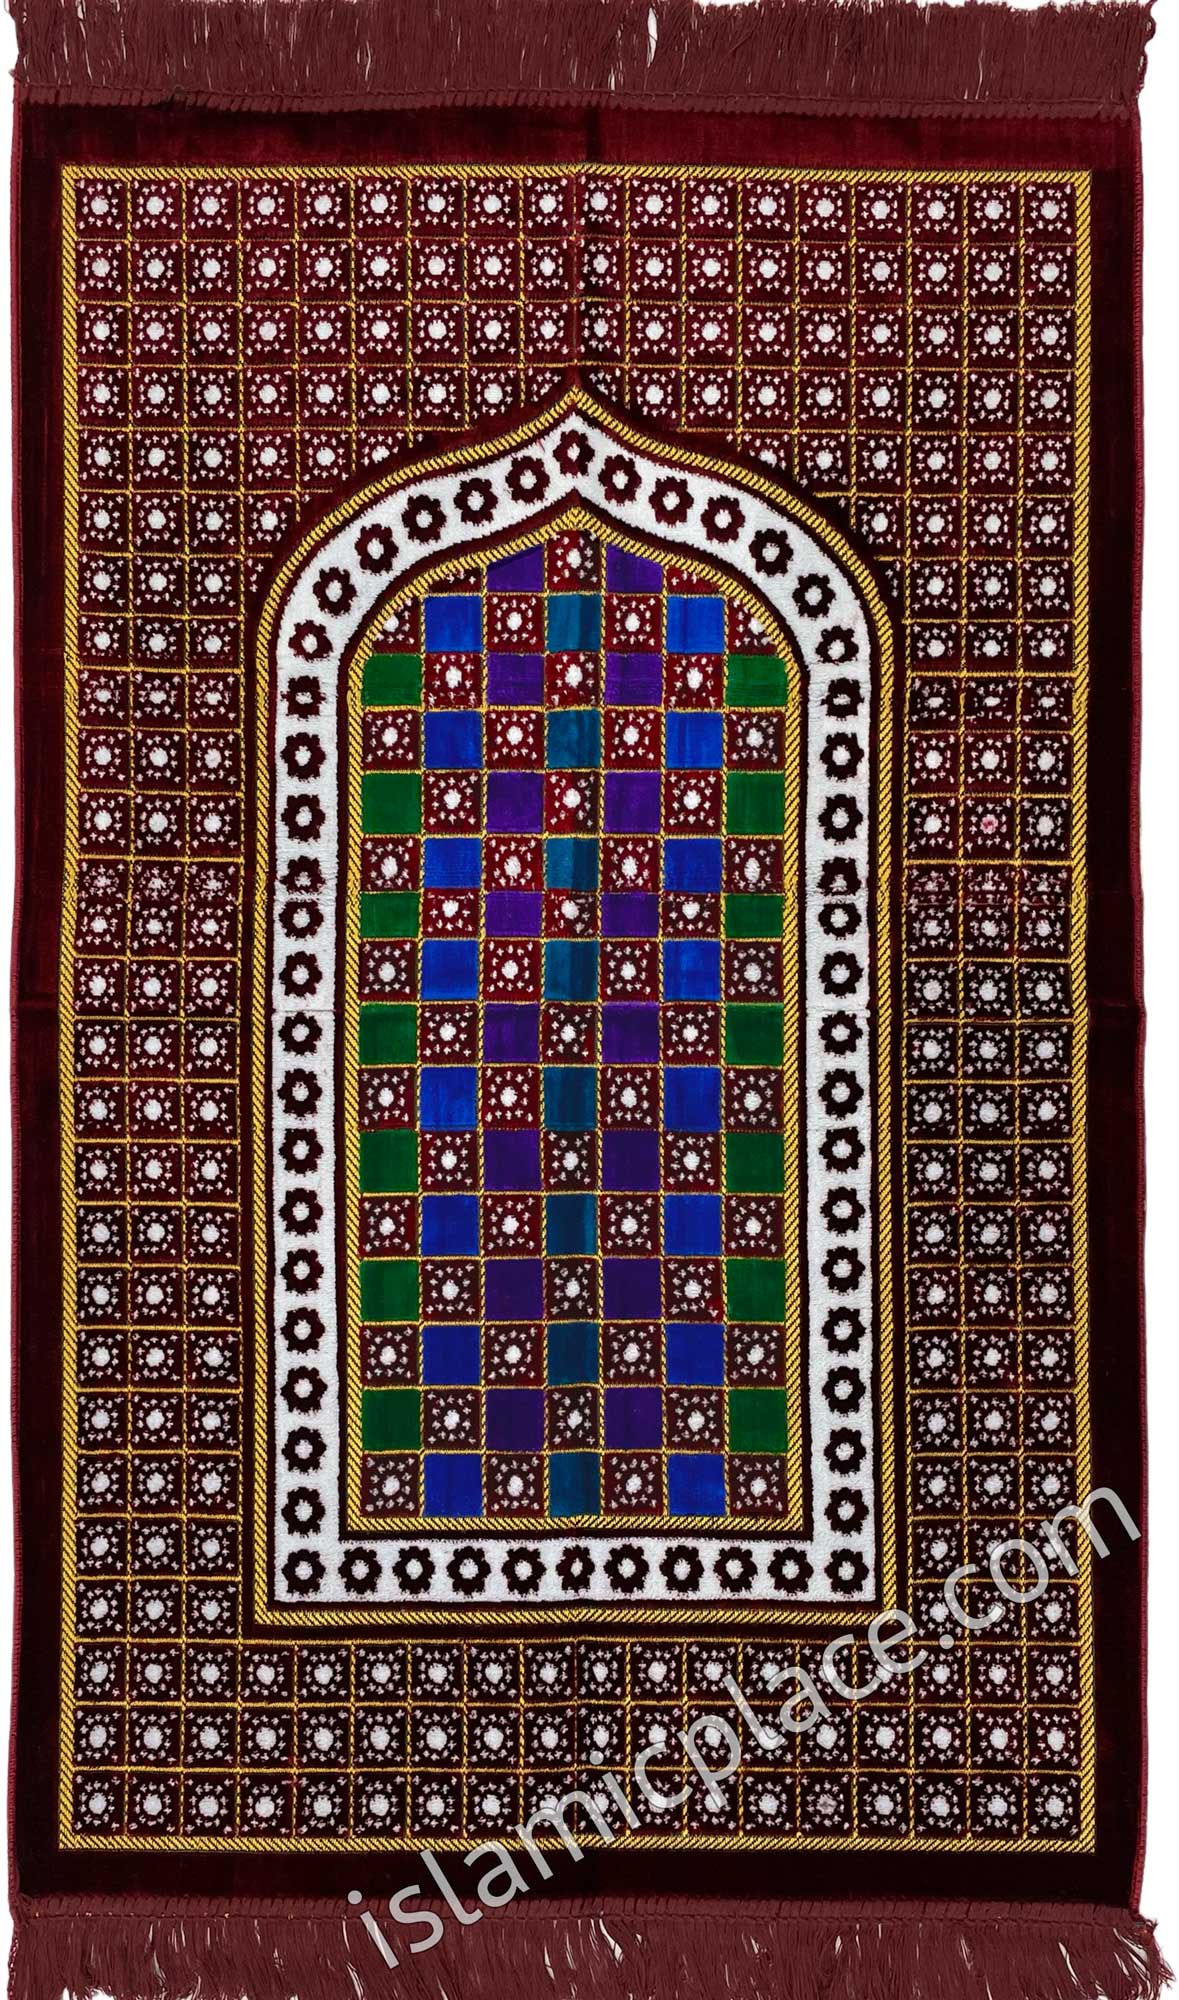 Burgundy Prayer with Stain Glass Mihrab